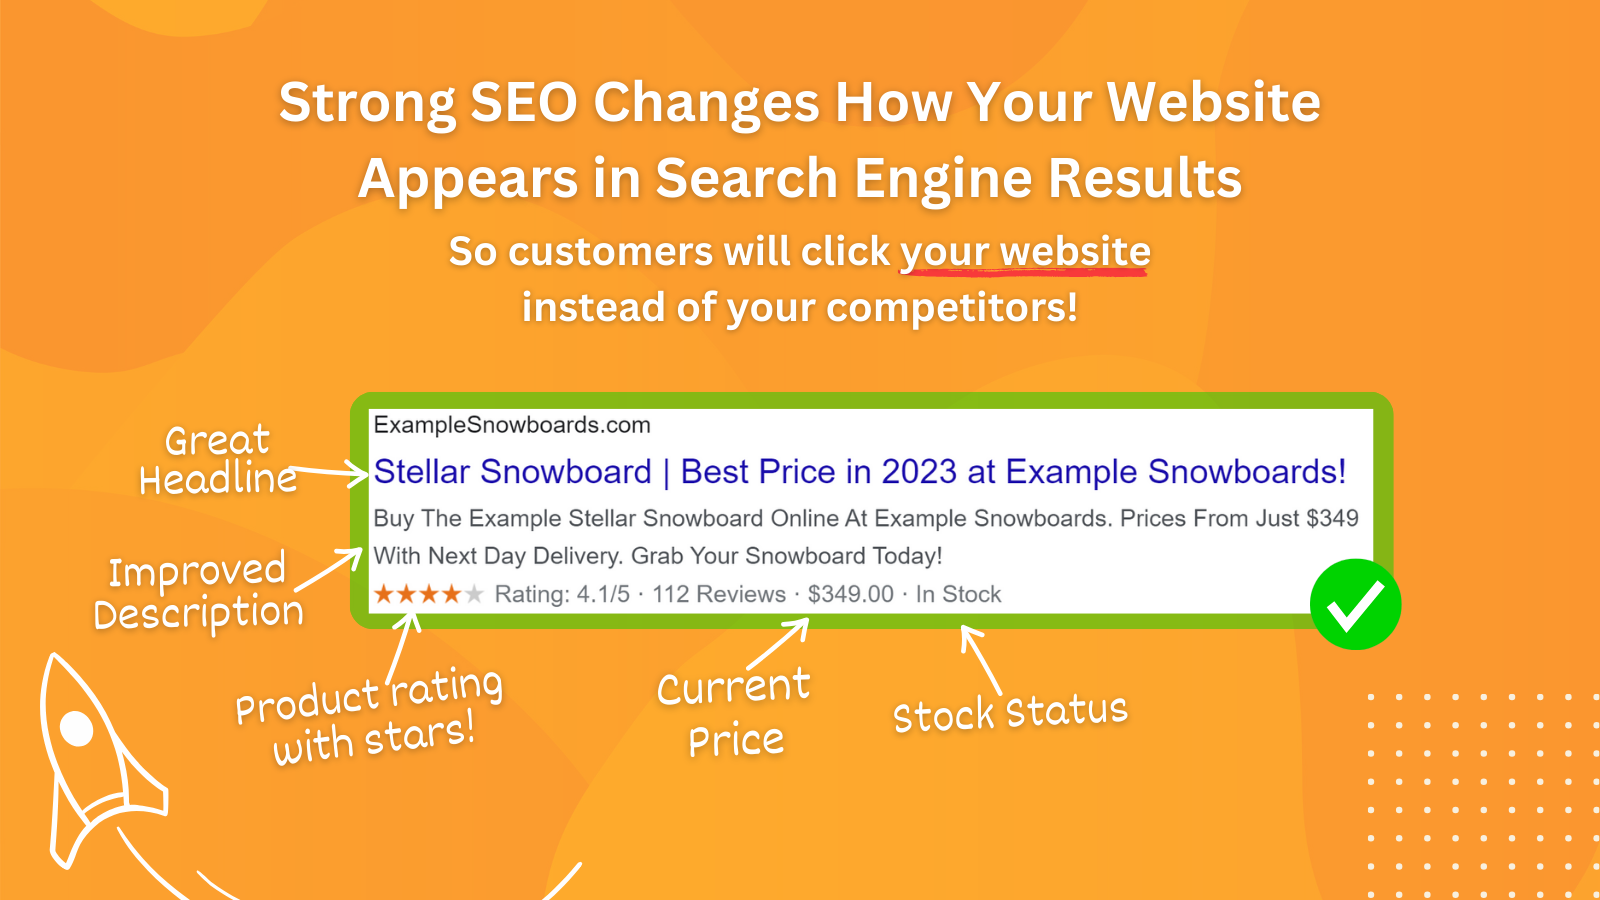 Strong SEO Optimizer - improves your search engine results